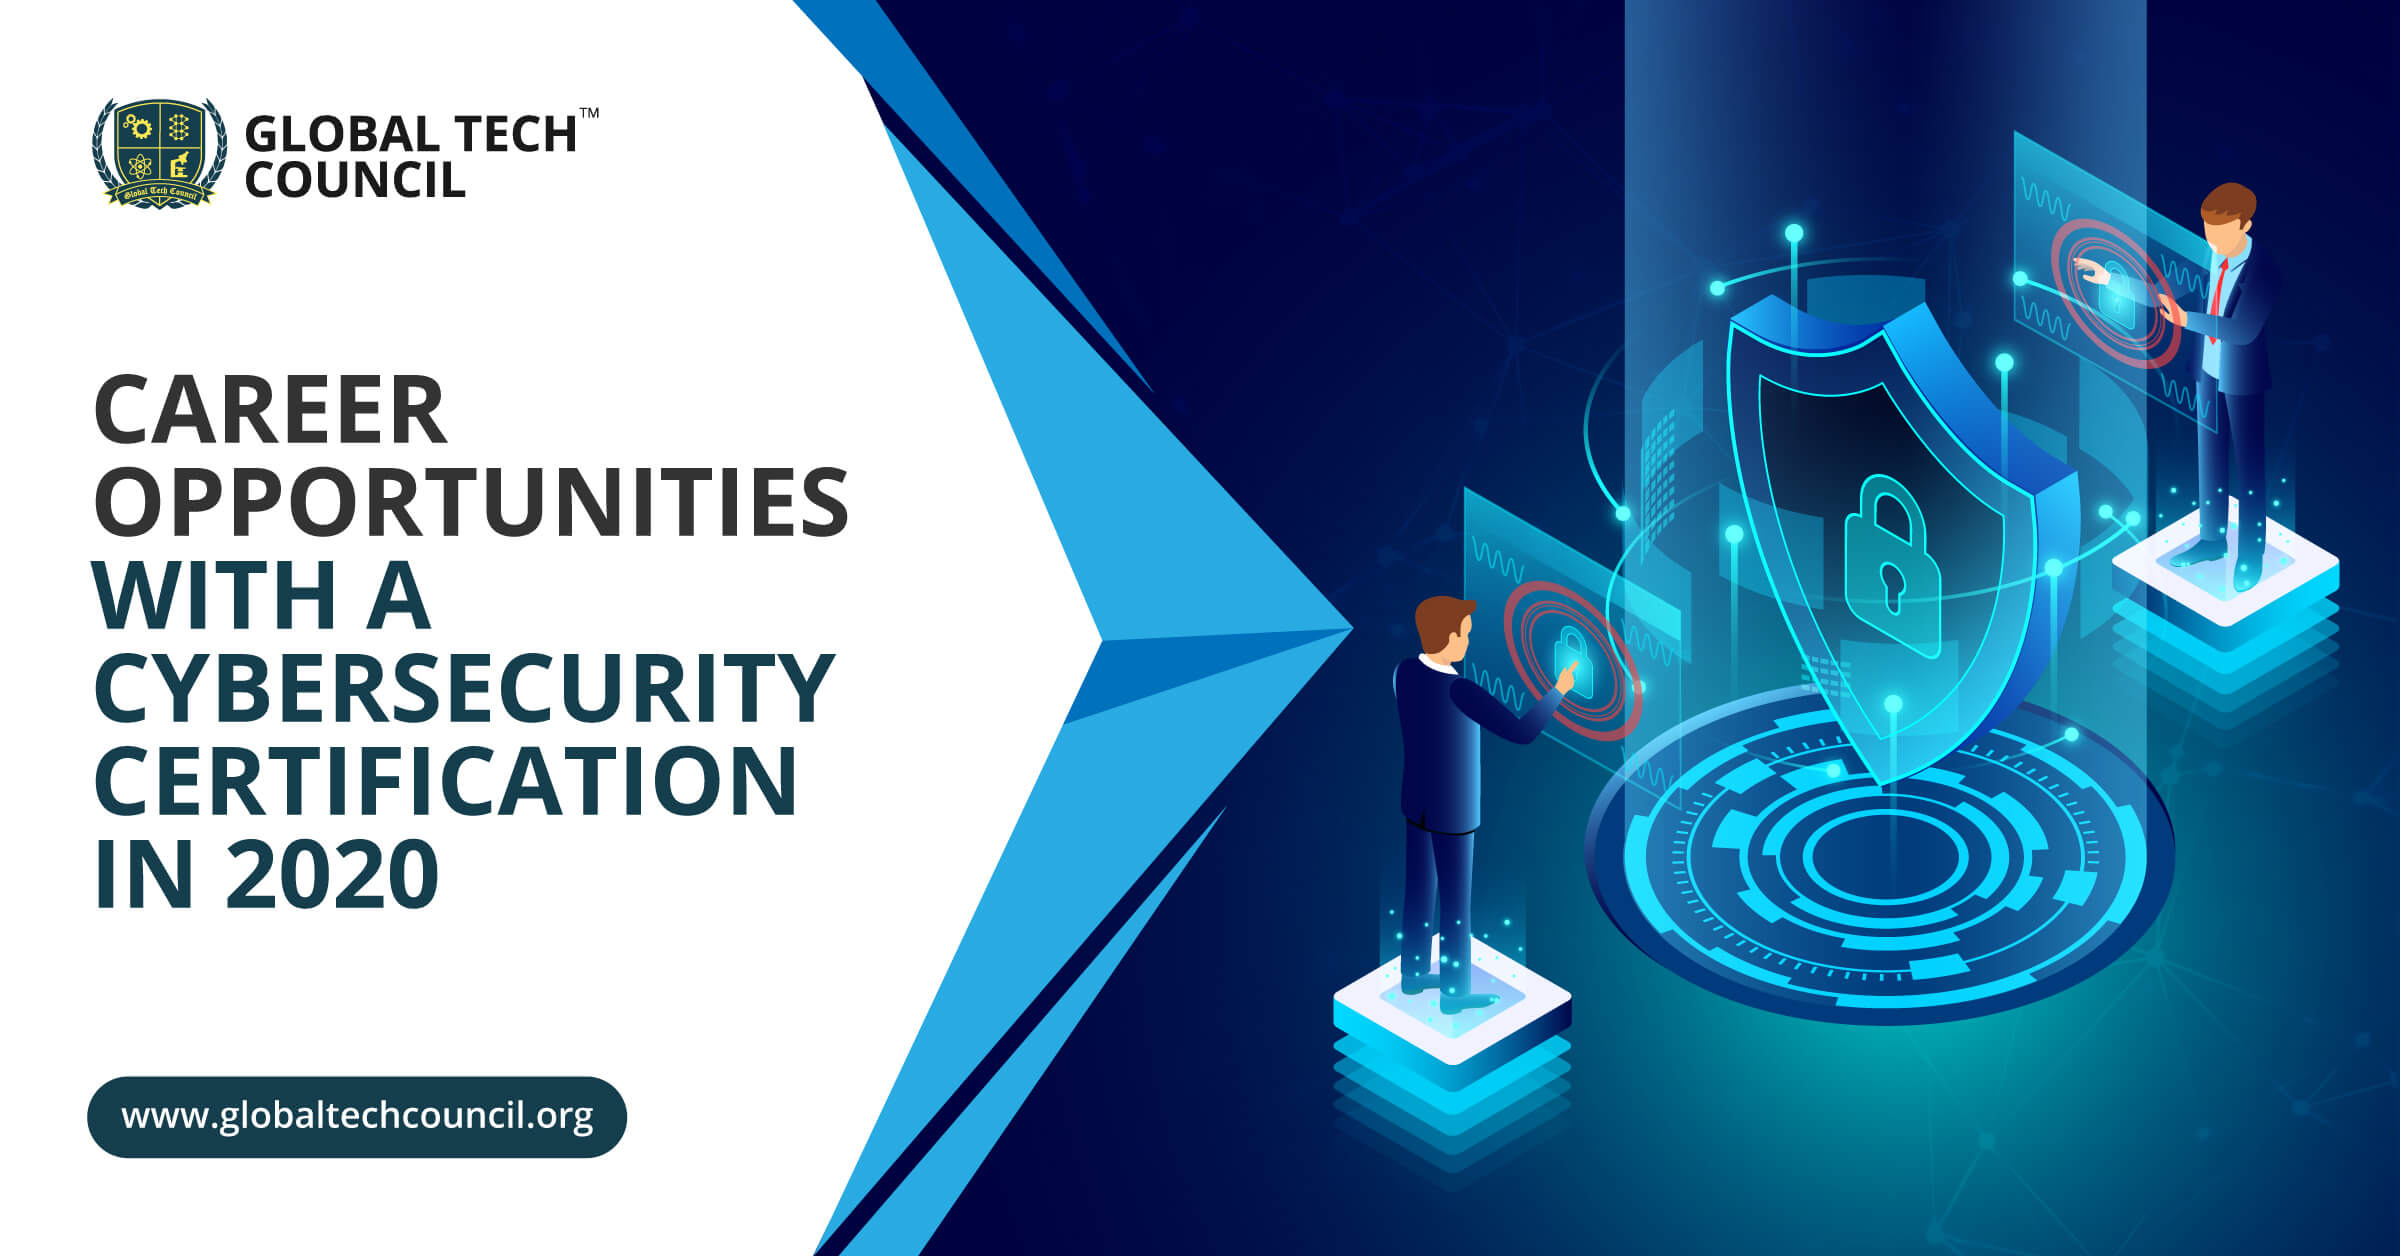 Career Opportunities With A Cyber Security Certification in 2020